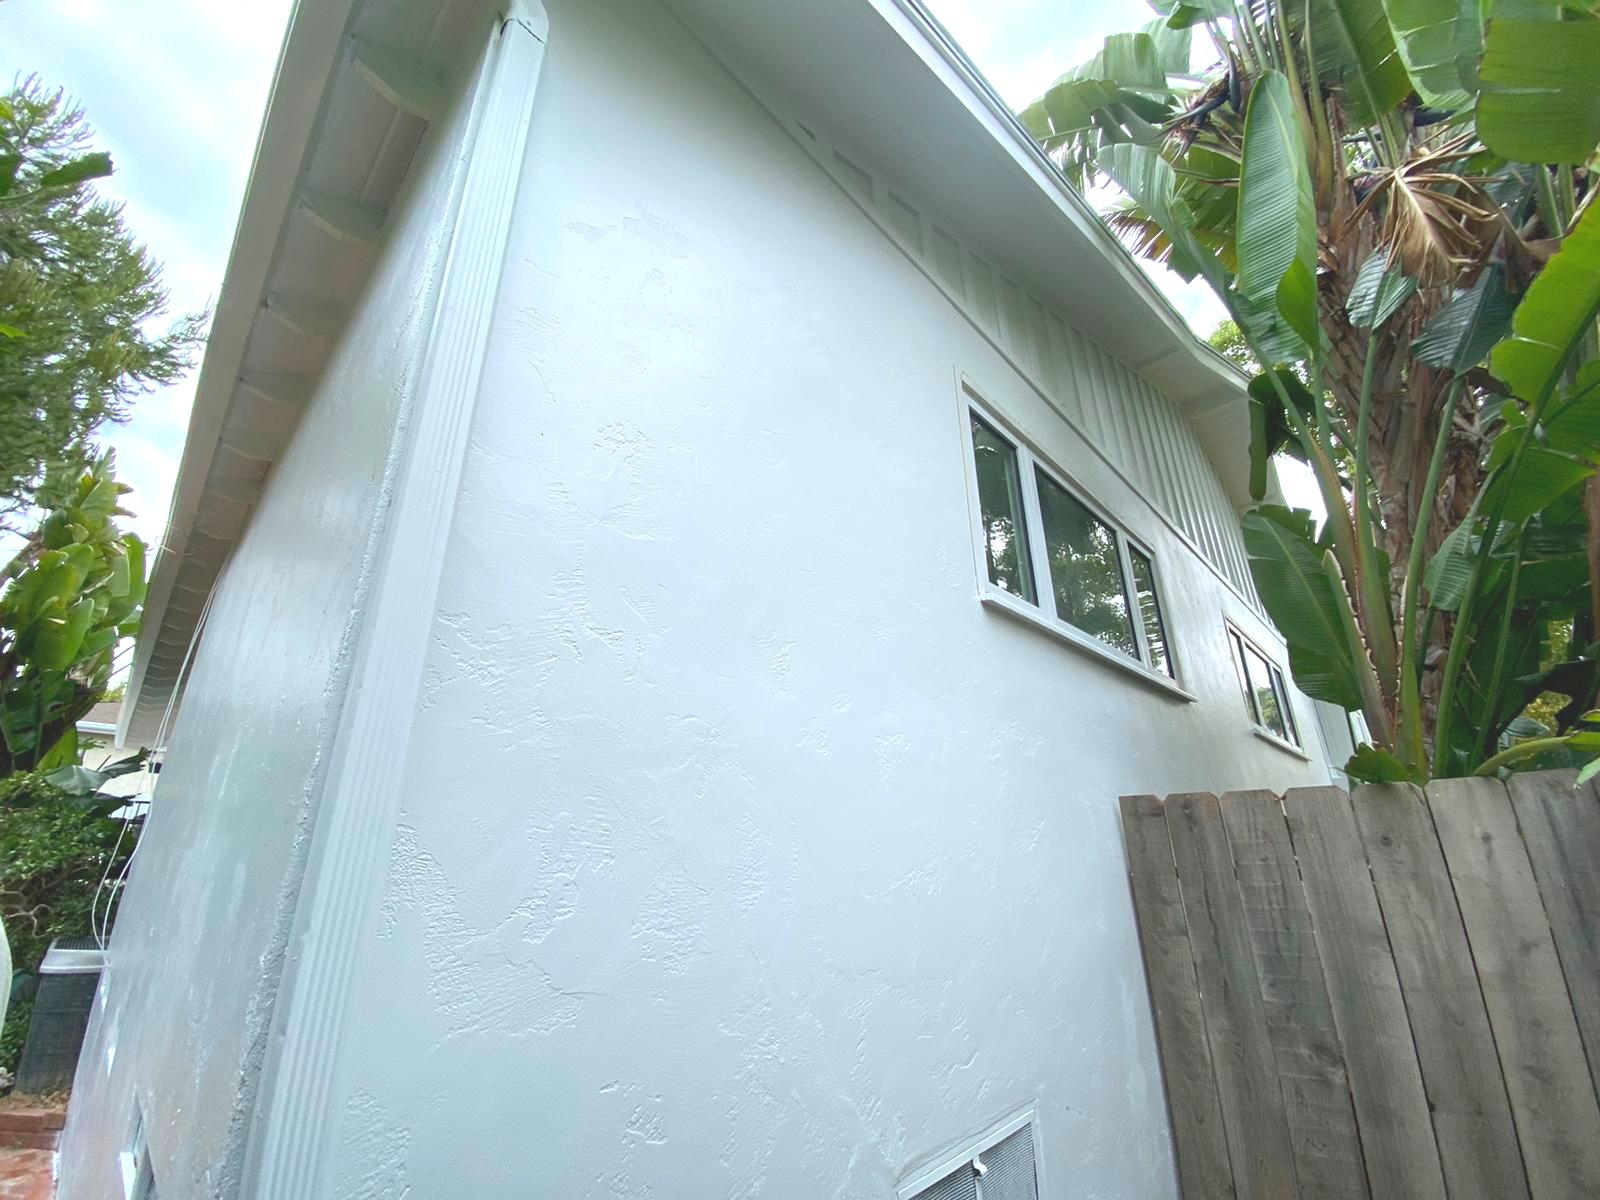 Coolwall Exterior Coating Application in San Diego, CA 92120